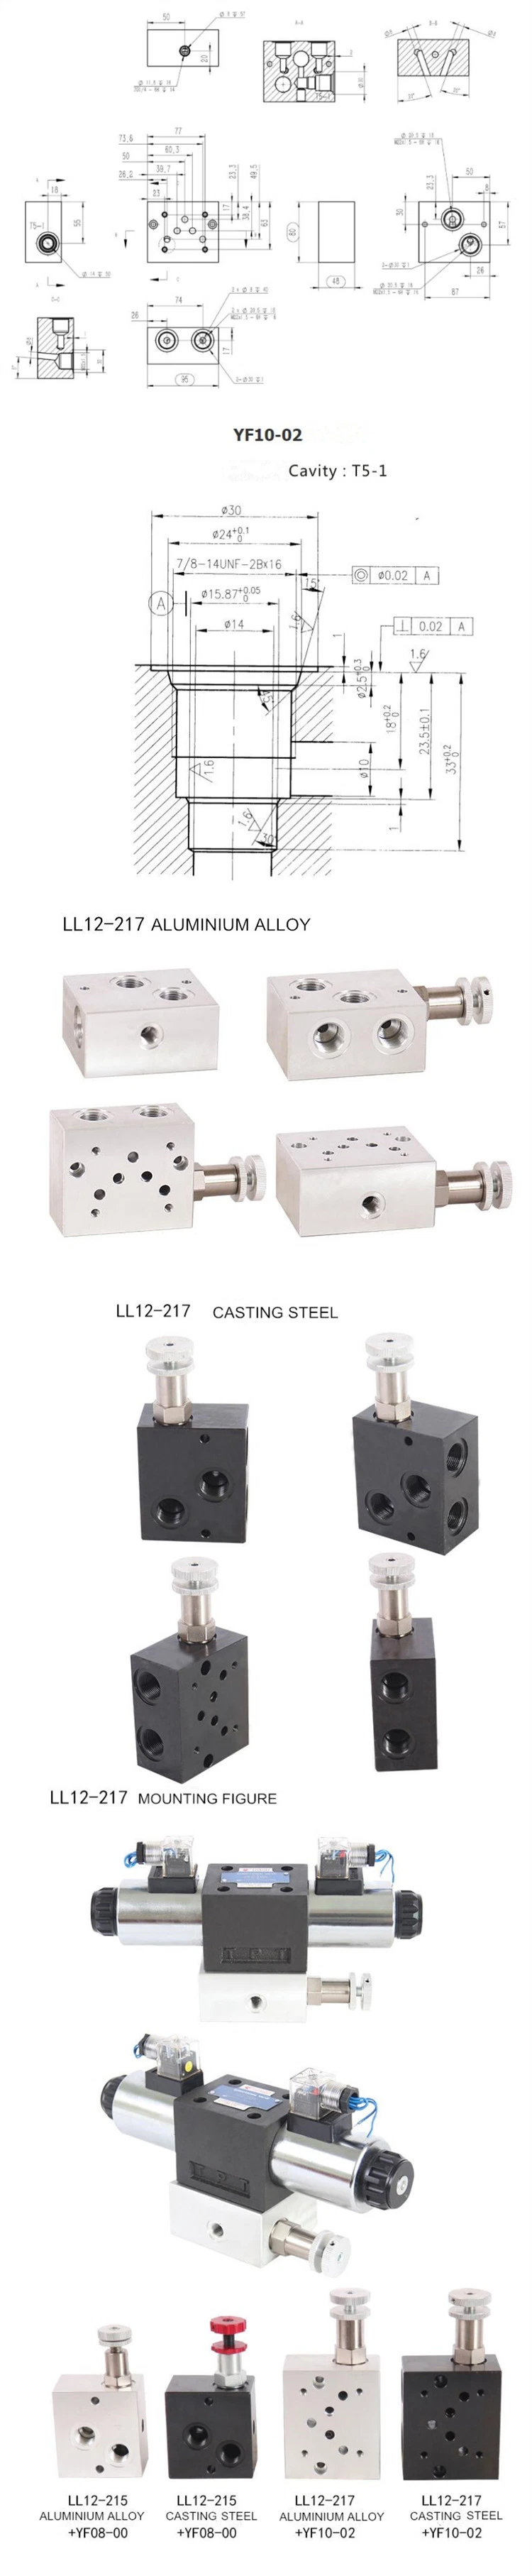 LL217 Hydraulic Standard Subplate Block for Ng10 Directional Valve